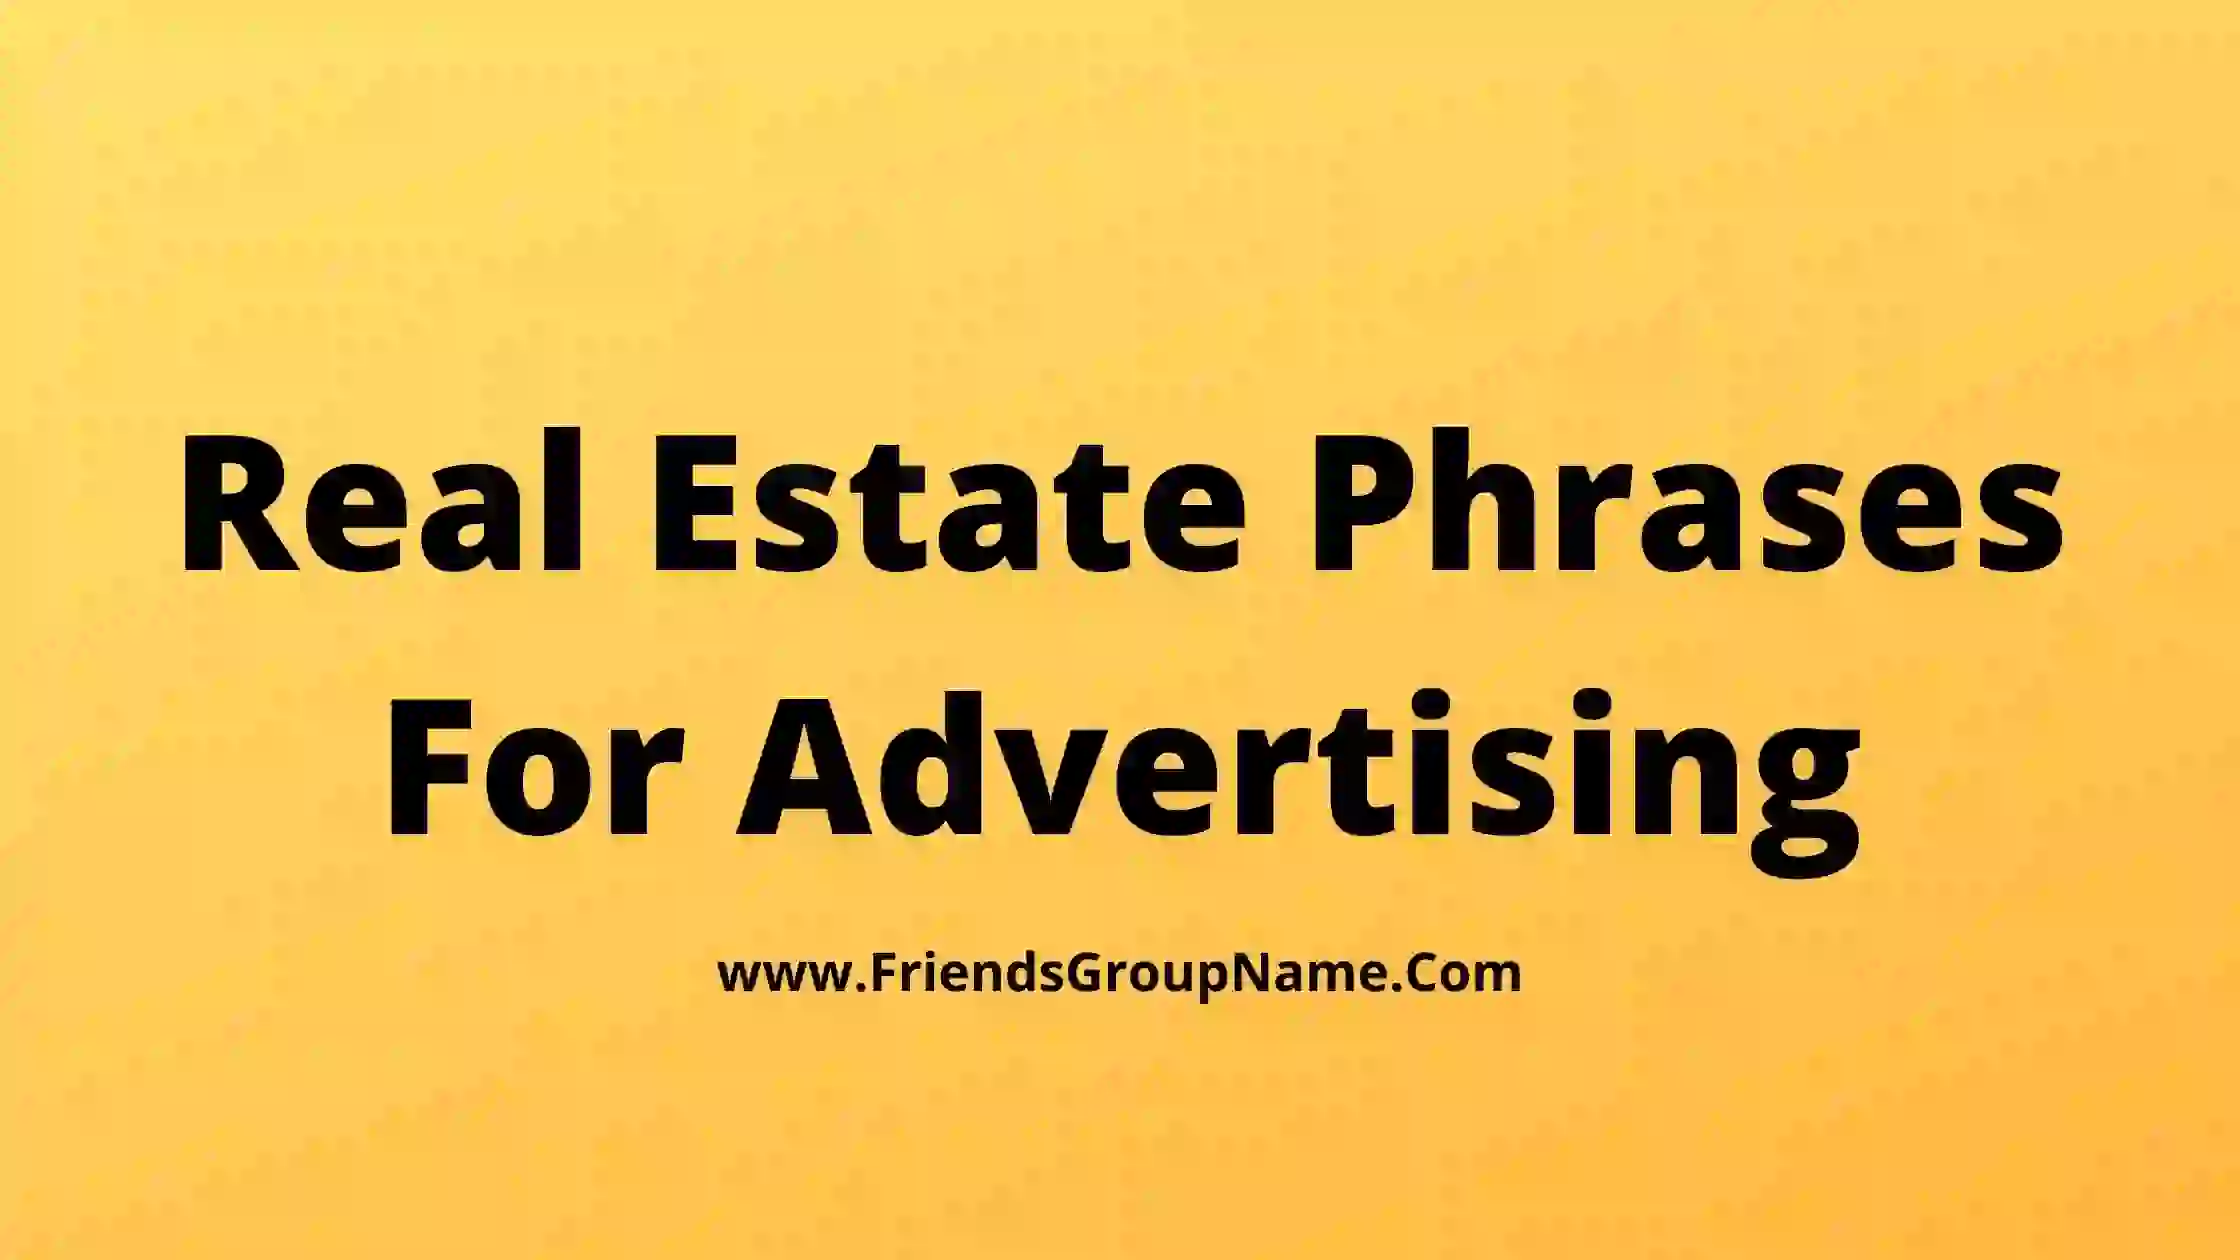 Real Estate Phrases For Advertising